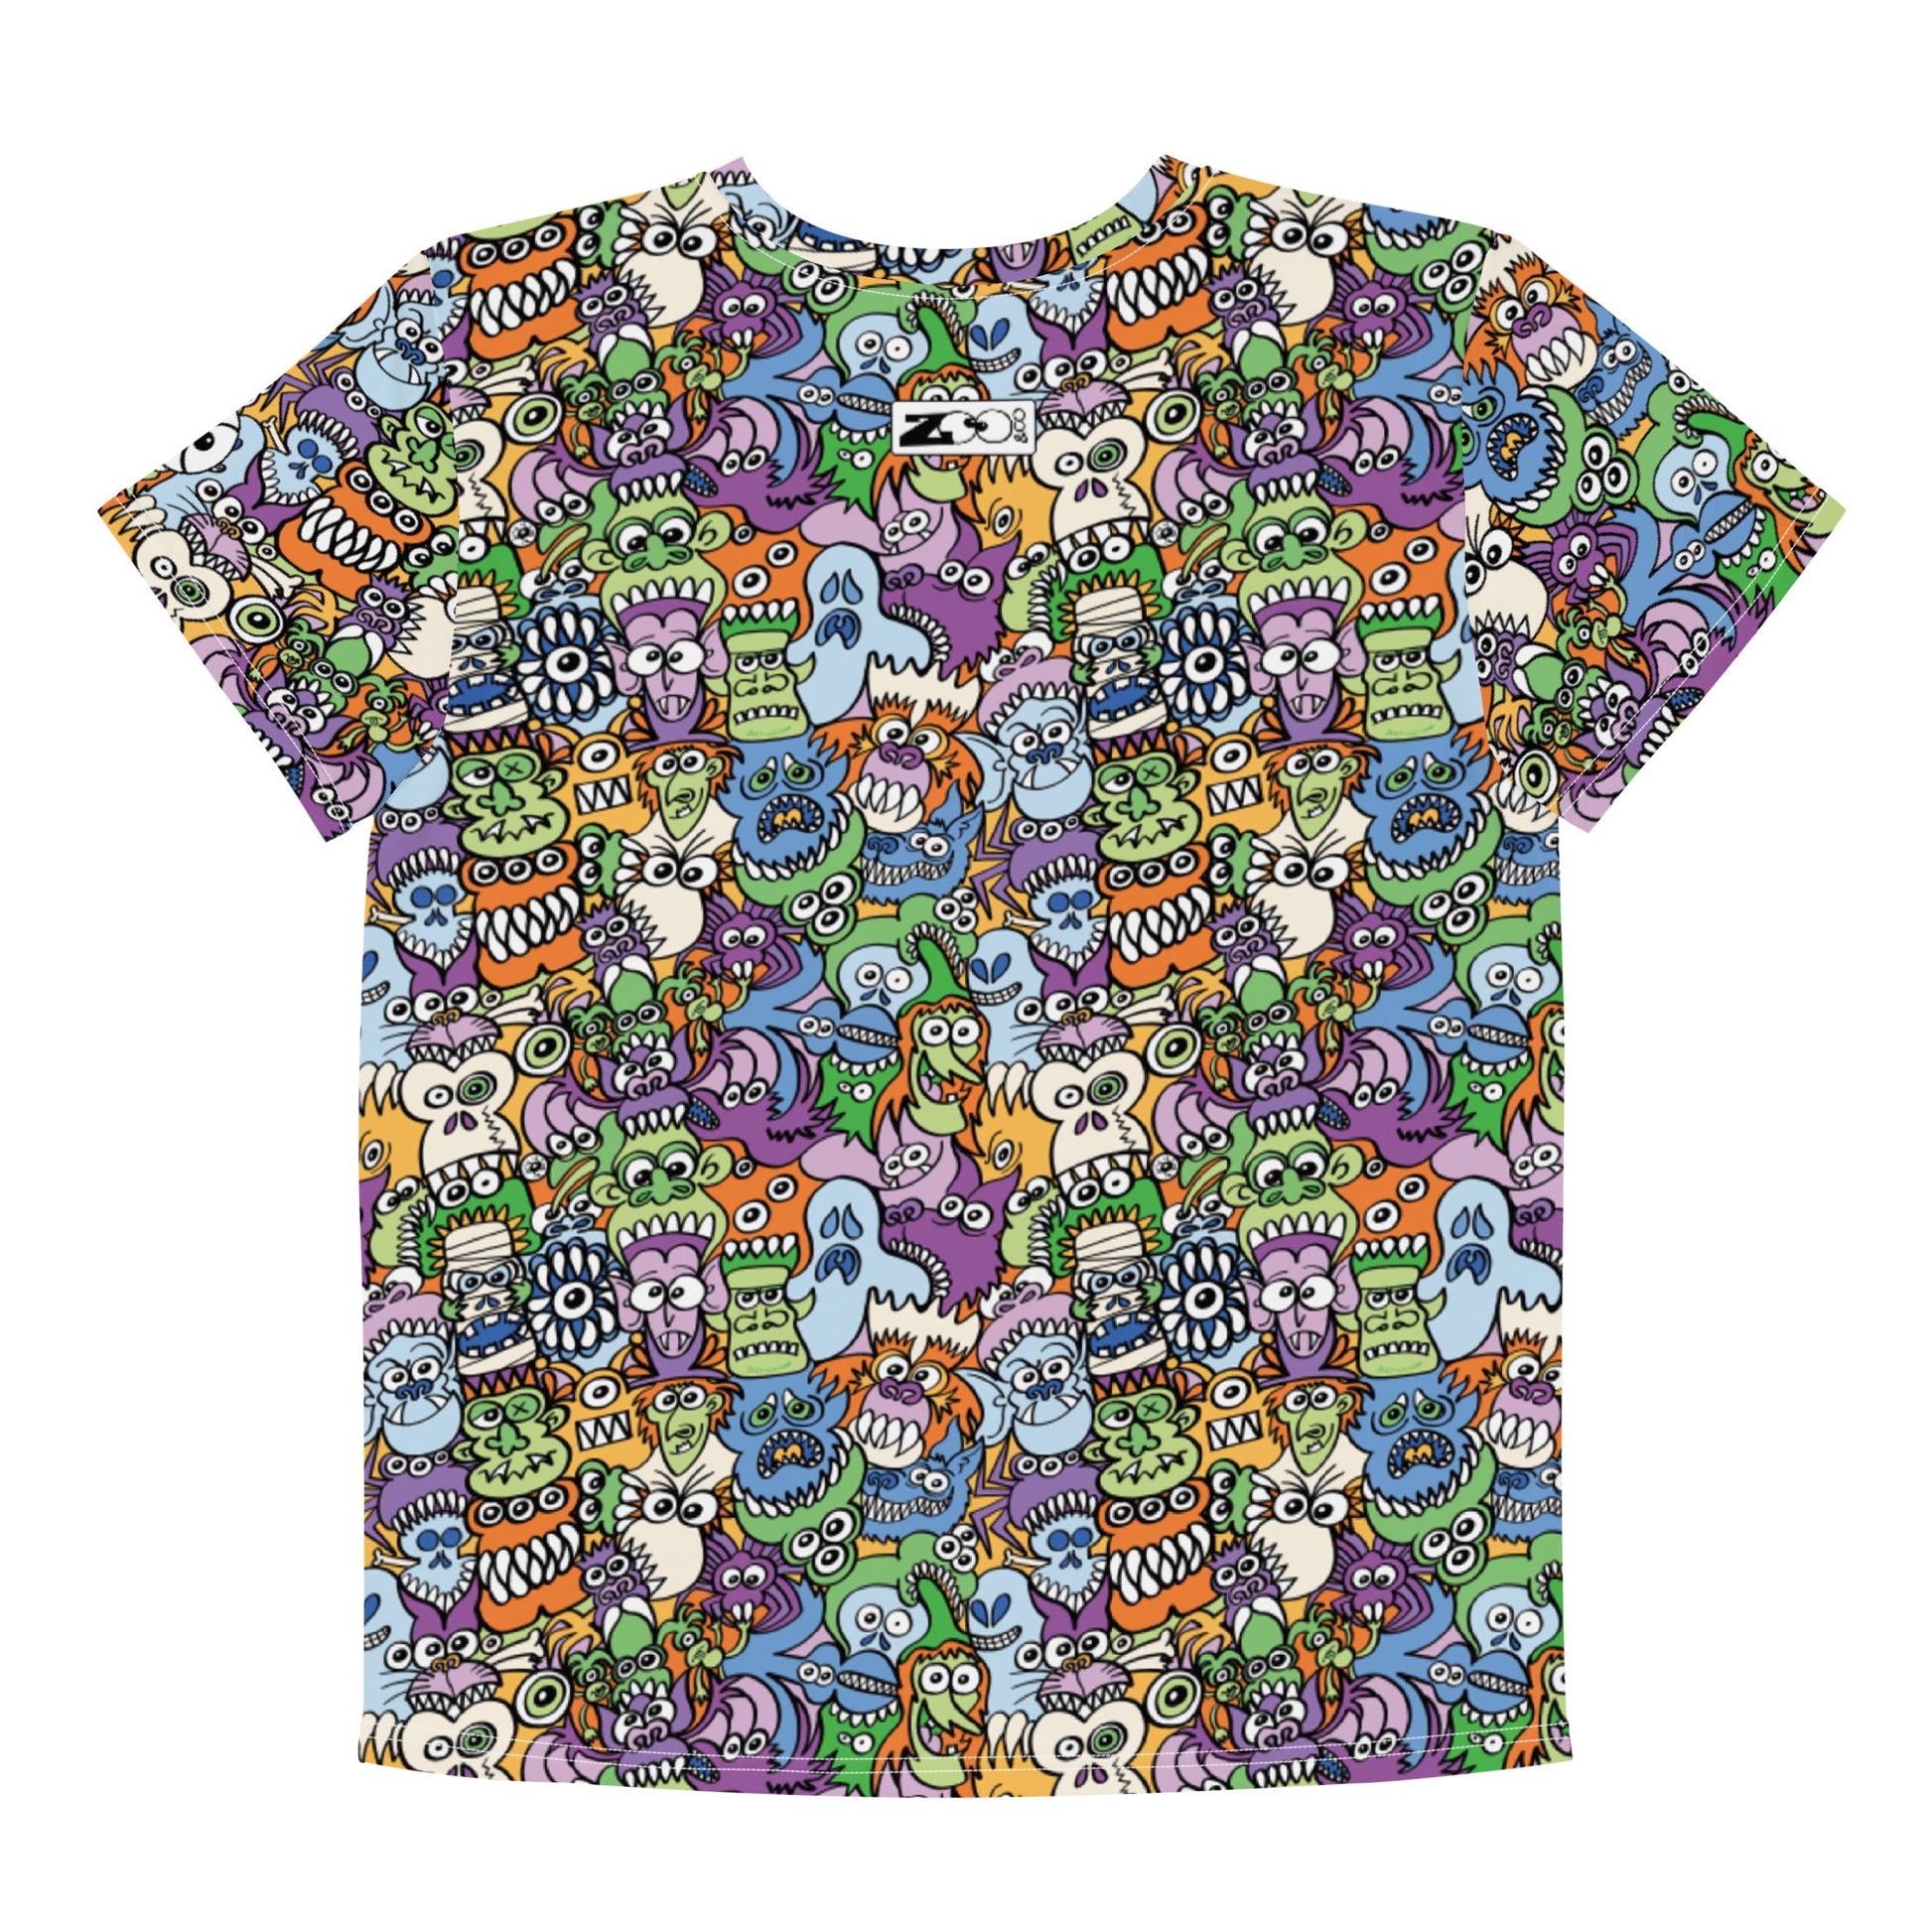 All the spooky Halloween monsters in a pattern design Youth crew neck t-shirt. Back view